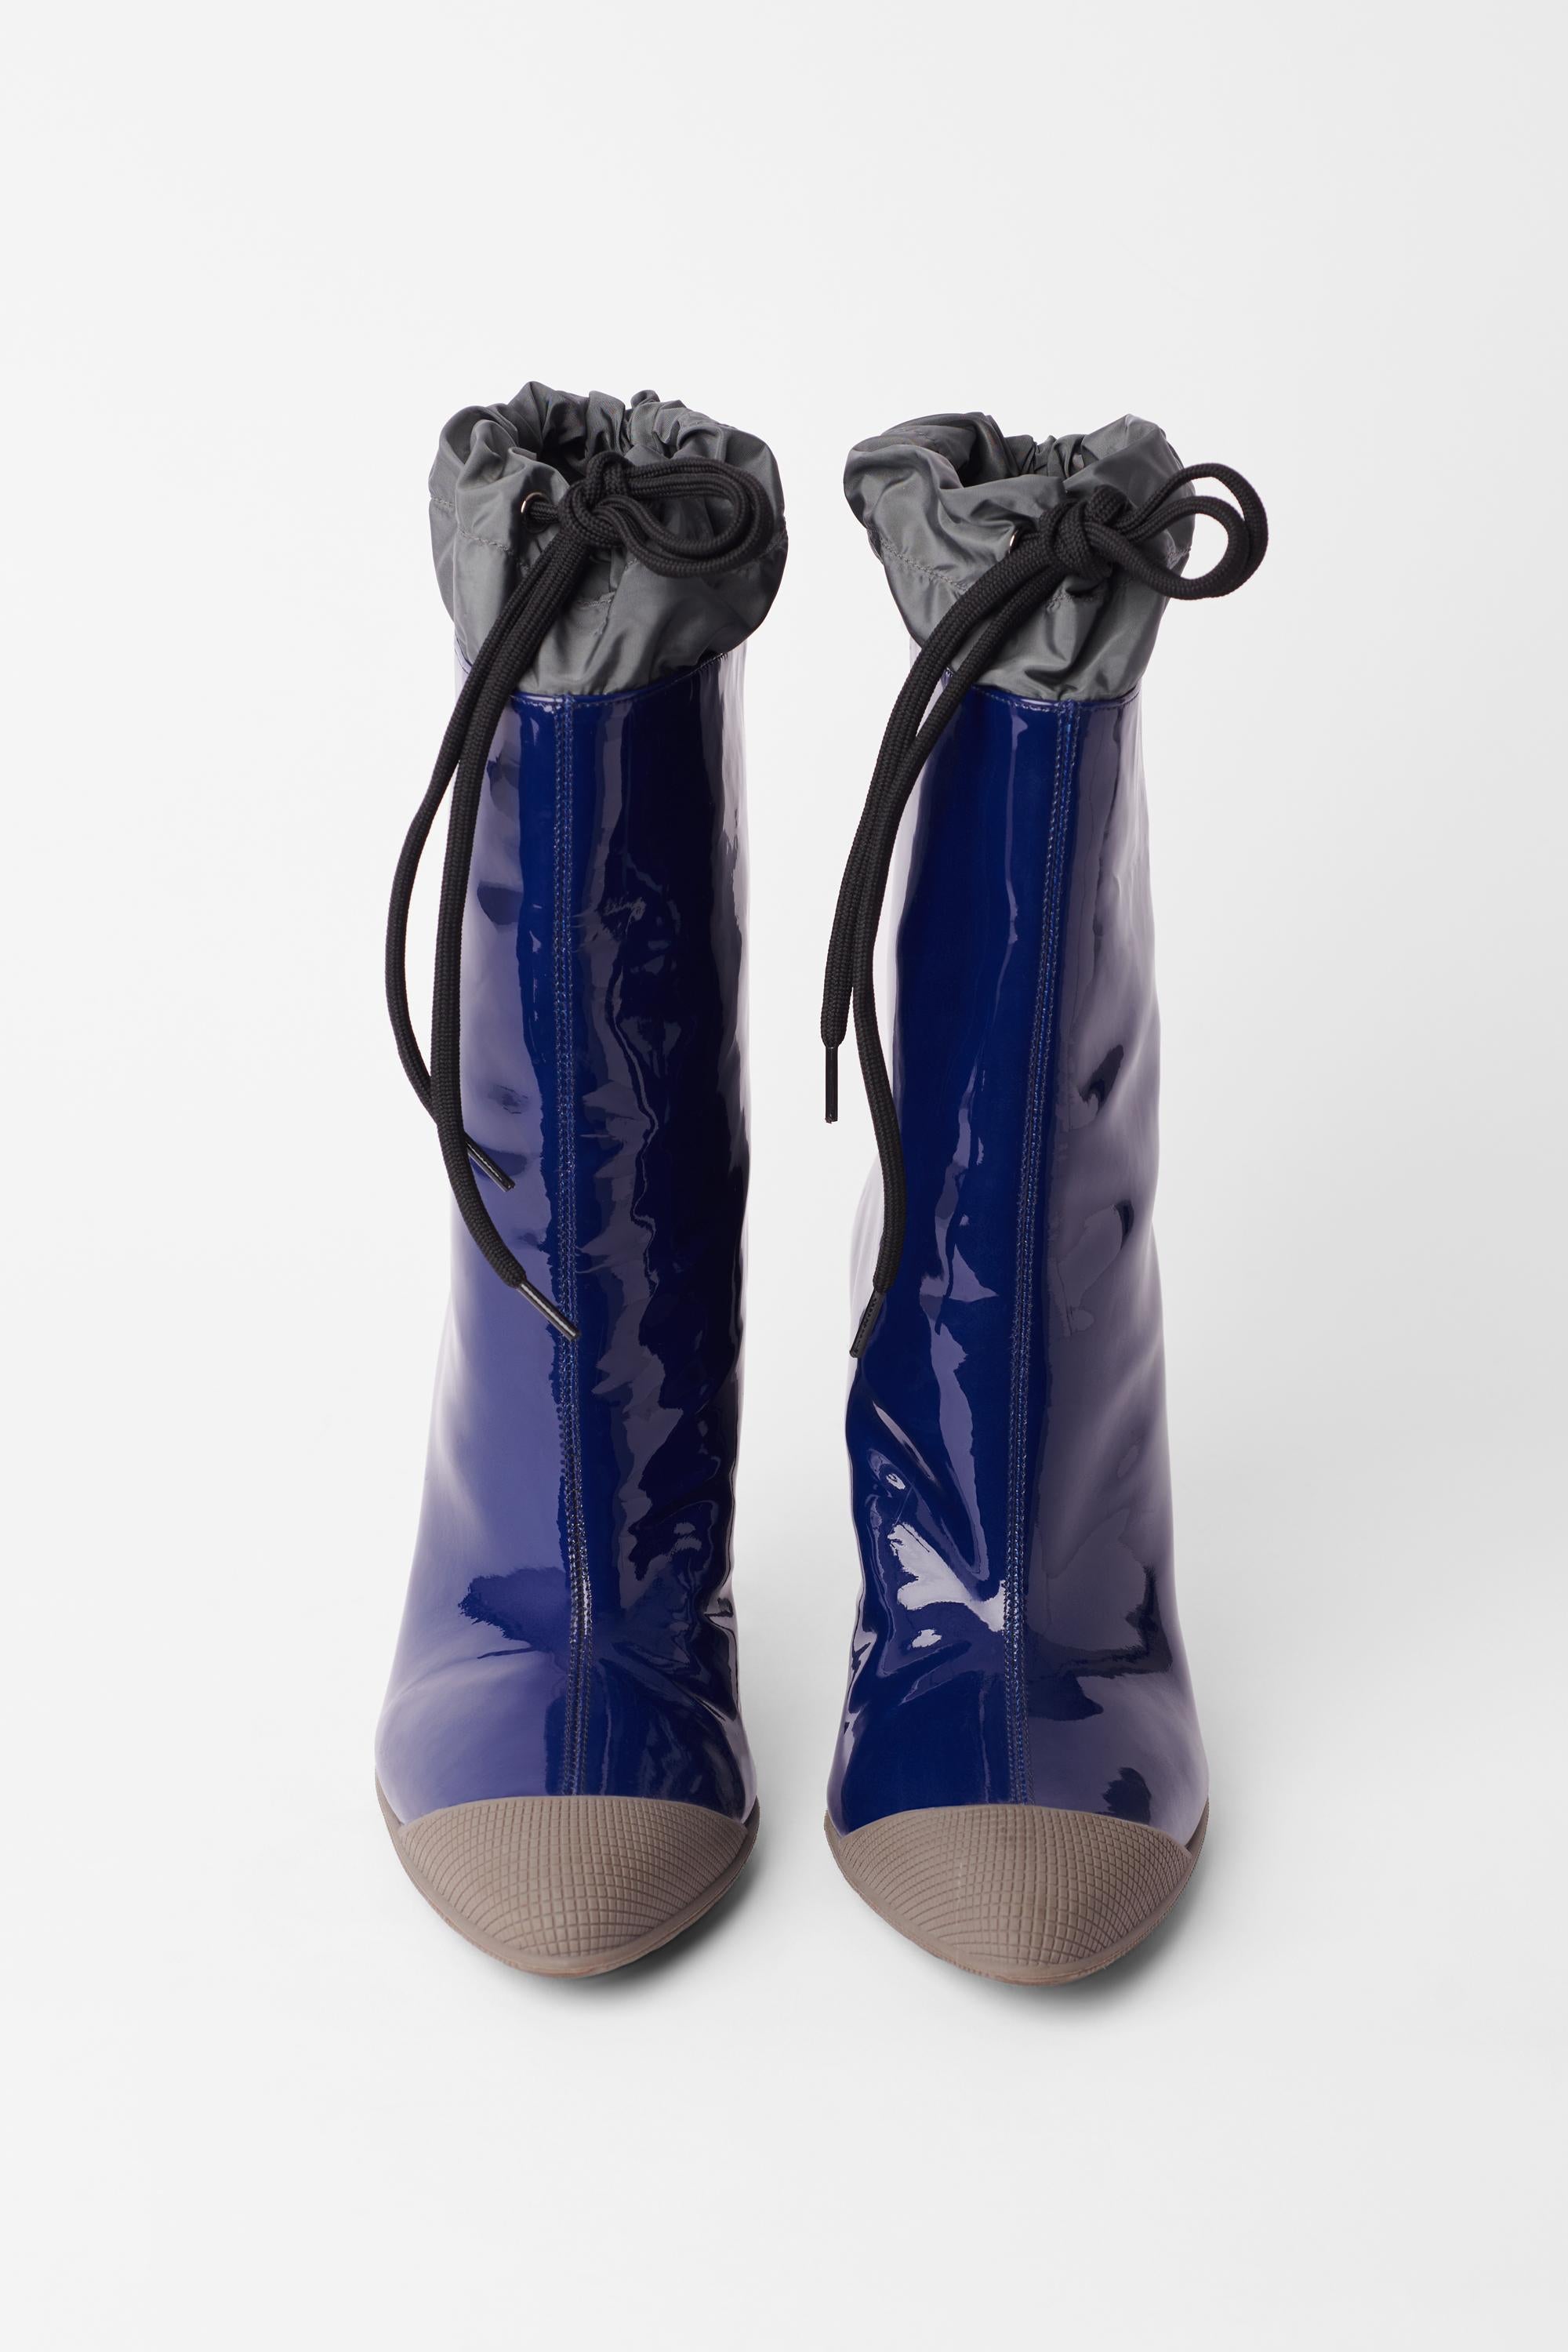 Miu Miu  Patent Leather Drawstring Ankle Boots In Excellent Condition For Sale In London, GB